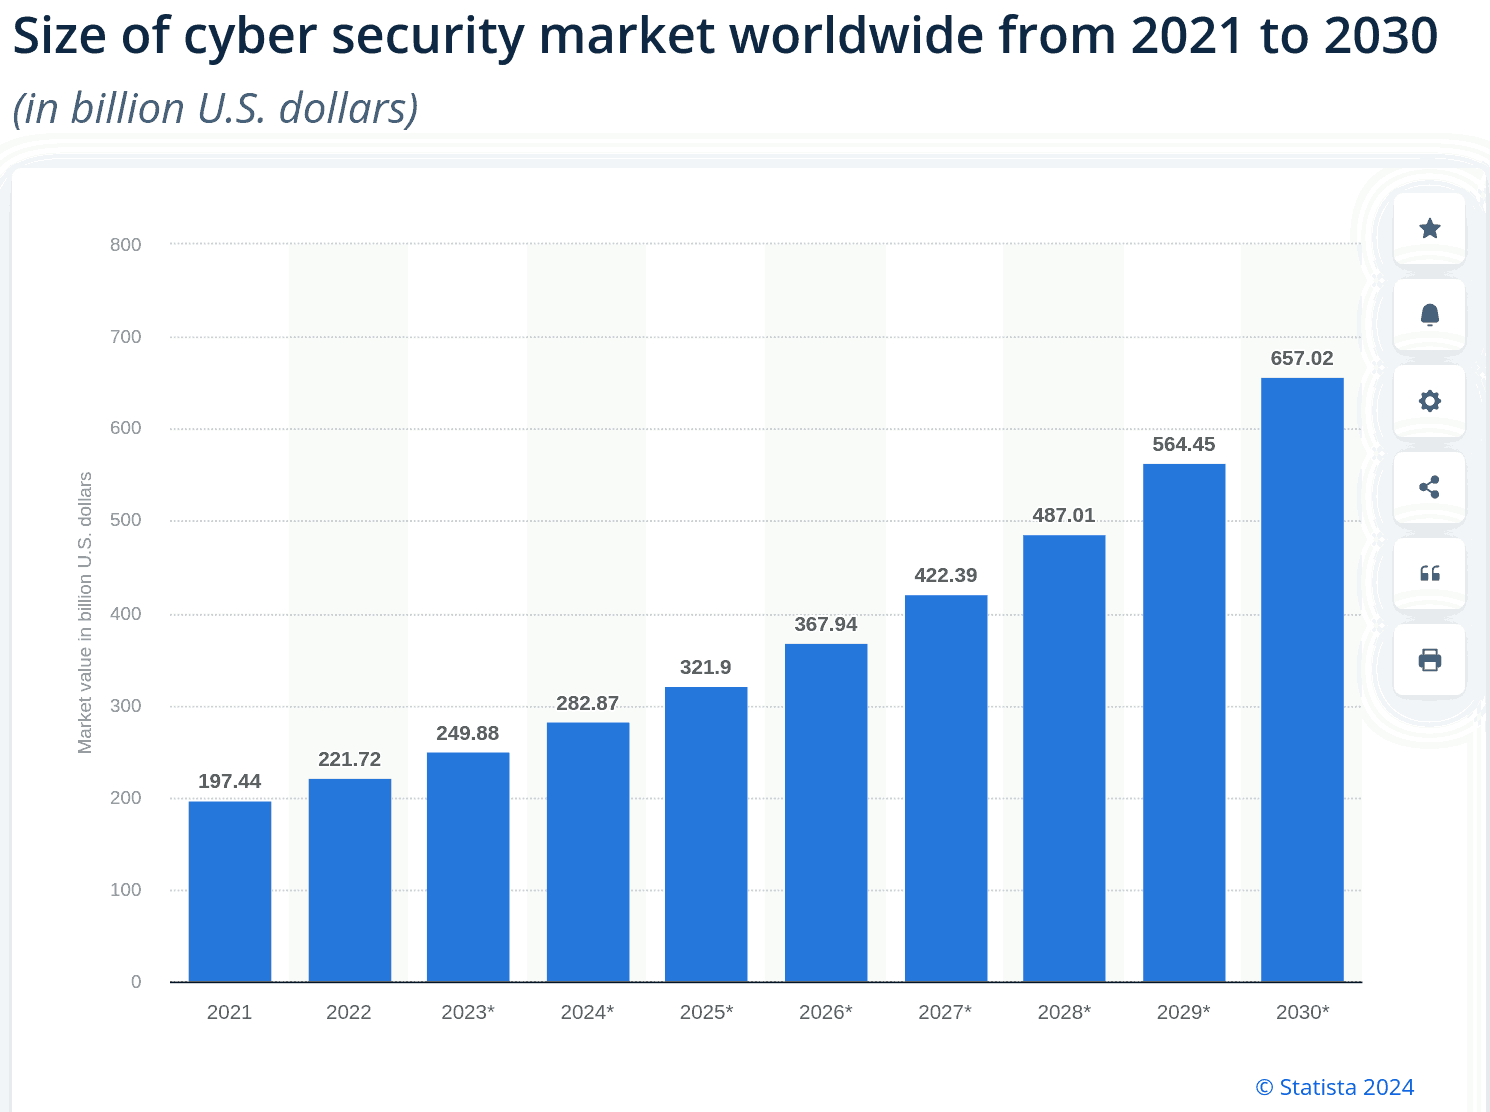 Size of Cyber Security market worldwide, from 2021 to 2030